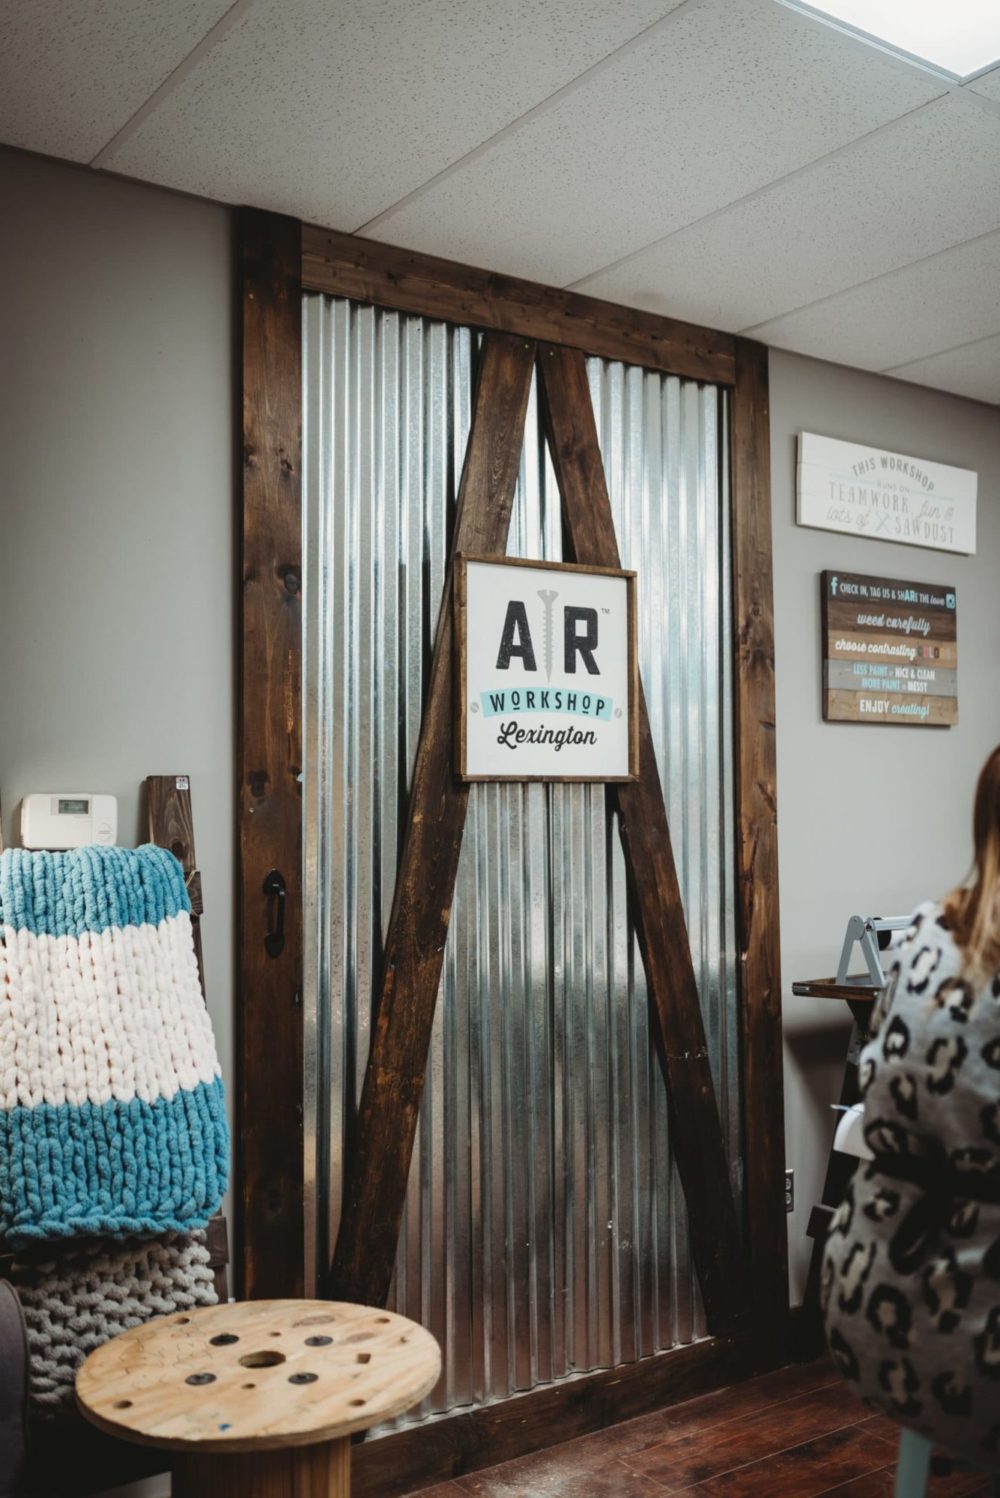 AR Workshop is a boutique do-it-yourself studio that offers hands-on classes for creating custom home decor from raw materials.